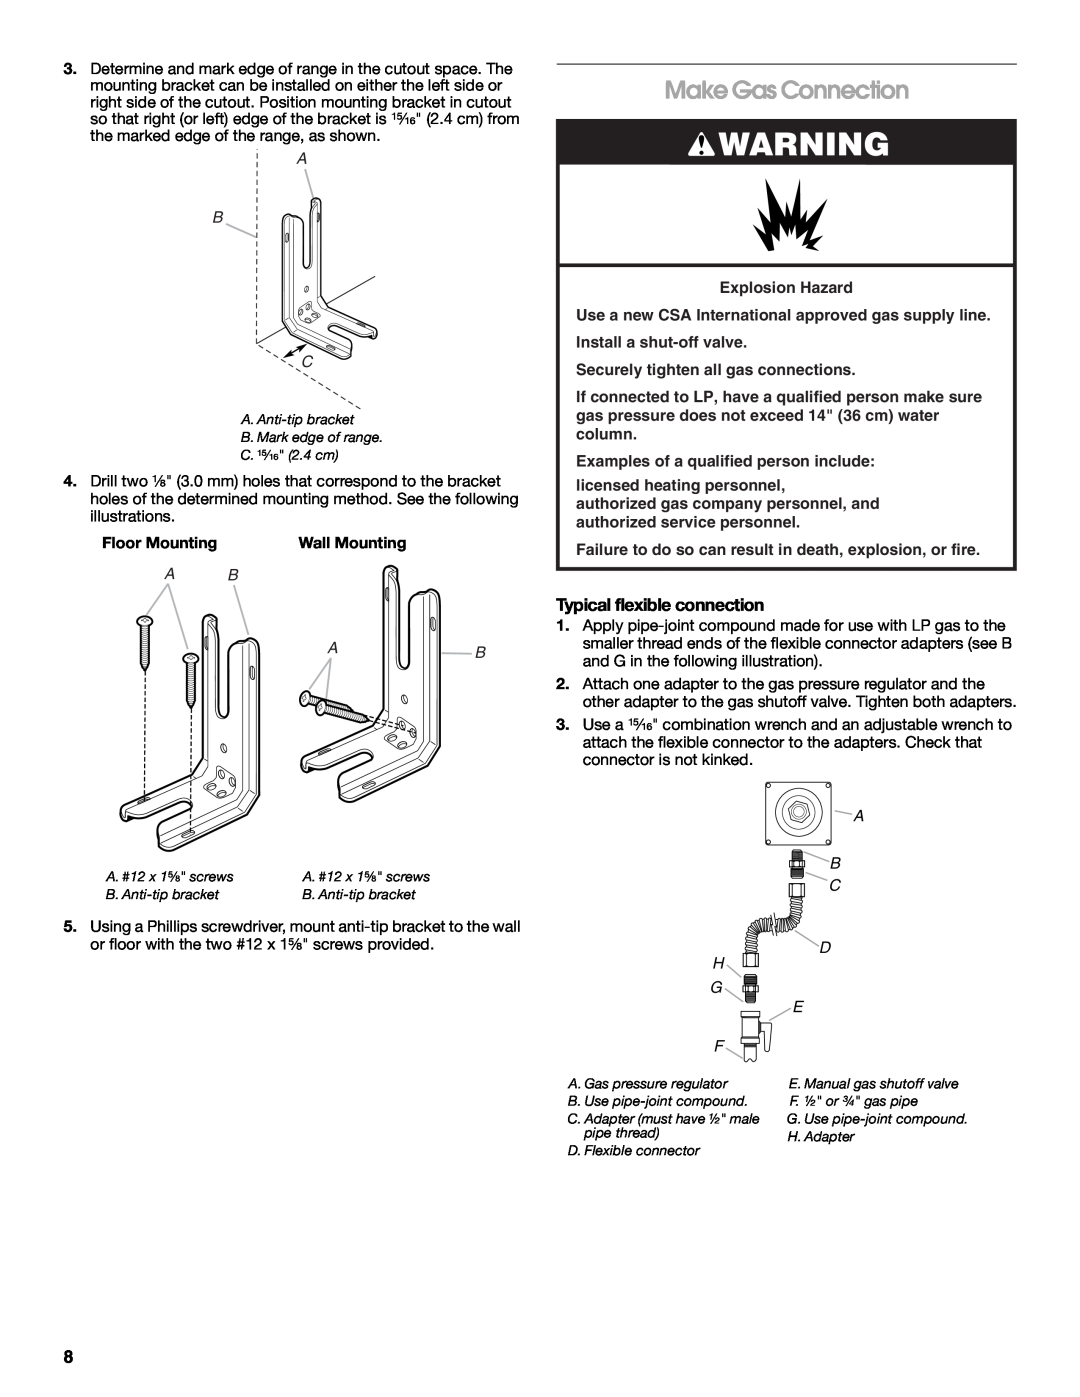 Whirlpool W10526071A installation instructions Make Gas Connection, Typical flexible connection, A B C, A B Ab 